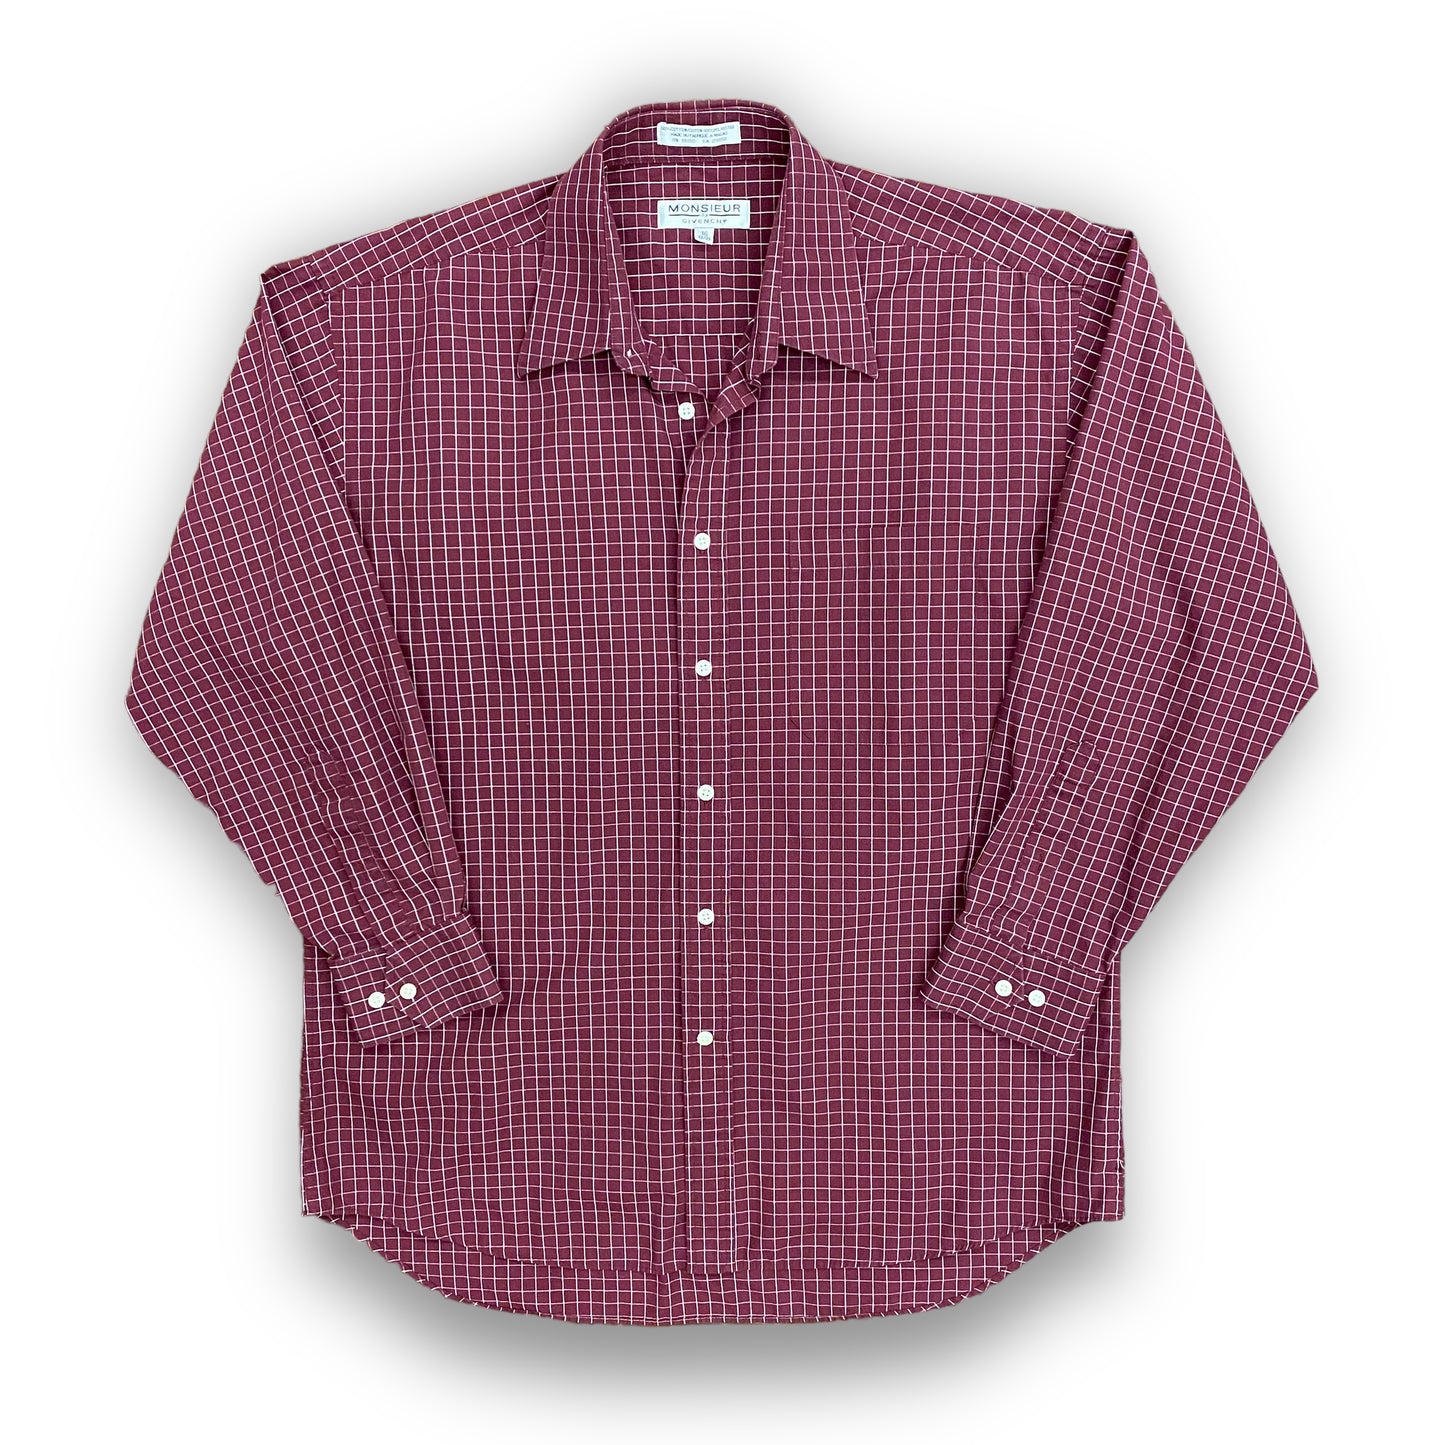 Vintage Monsieur by Givenchy Maroon Windowpane Button Up - Size Large (16)